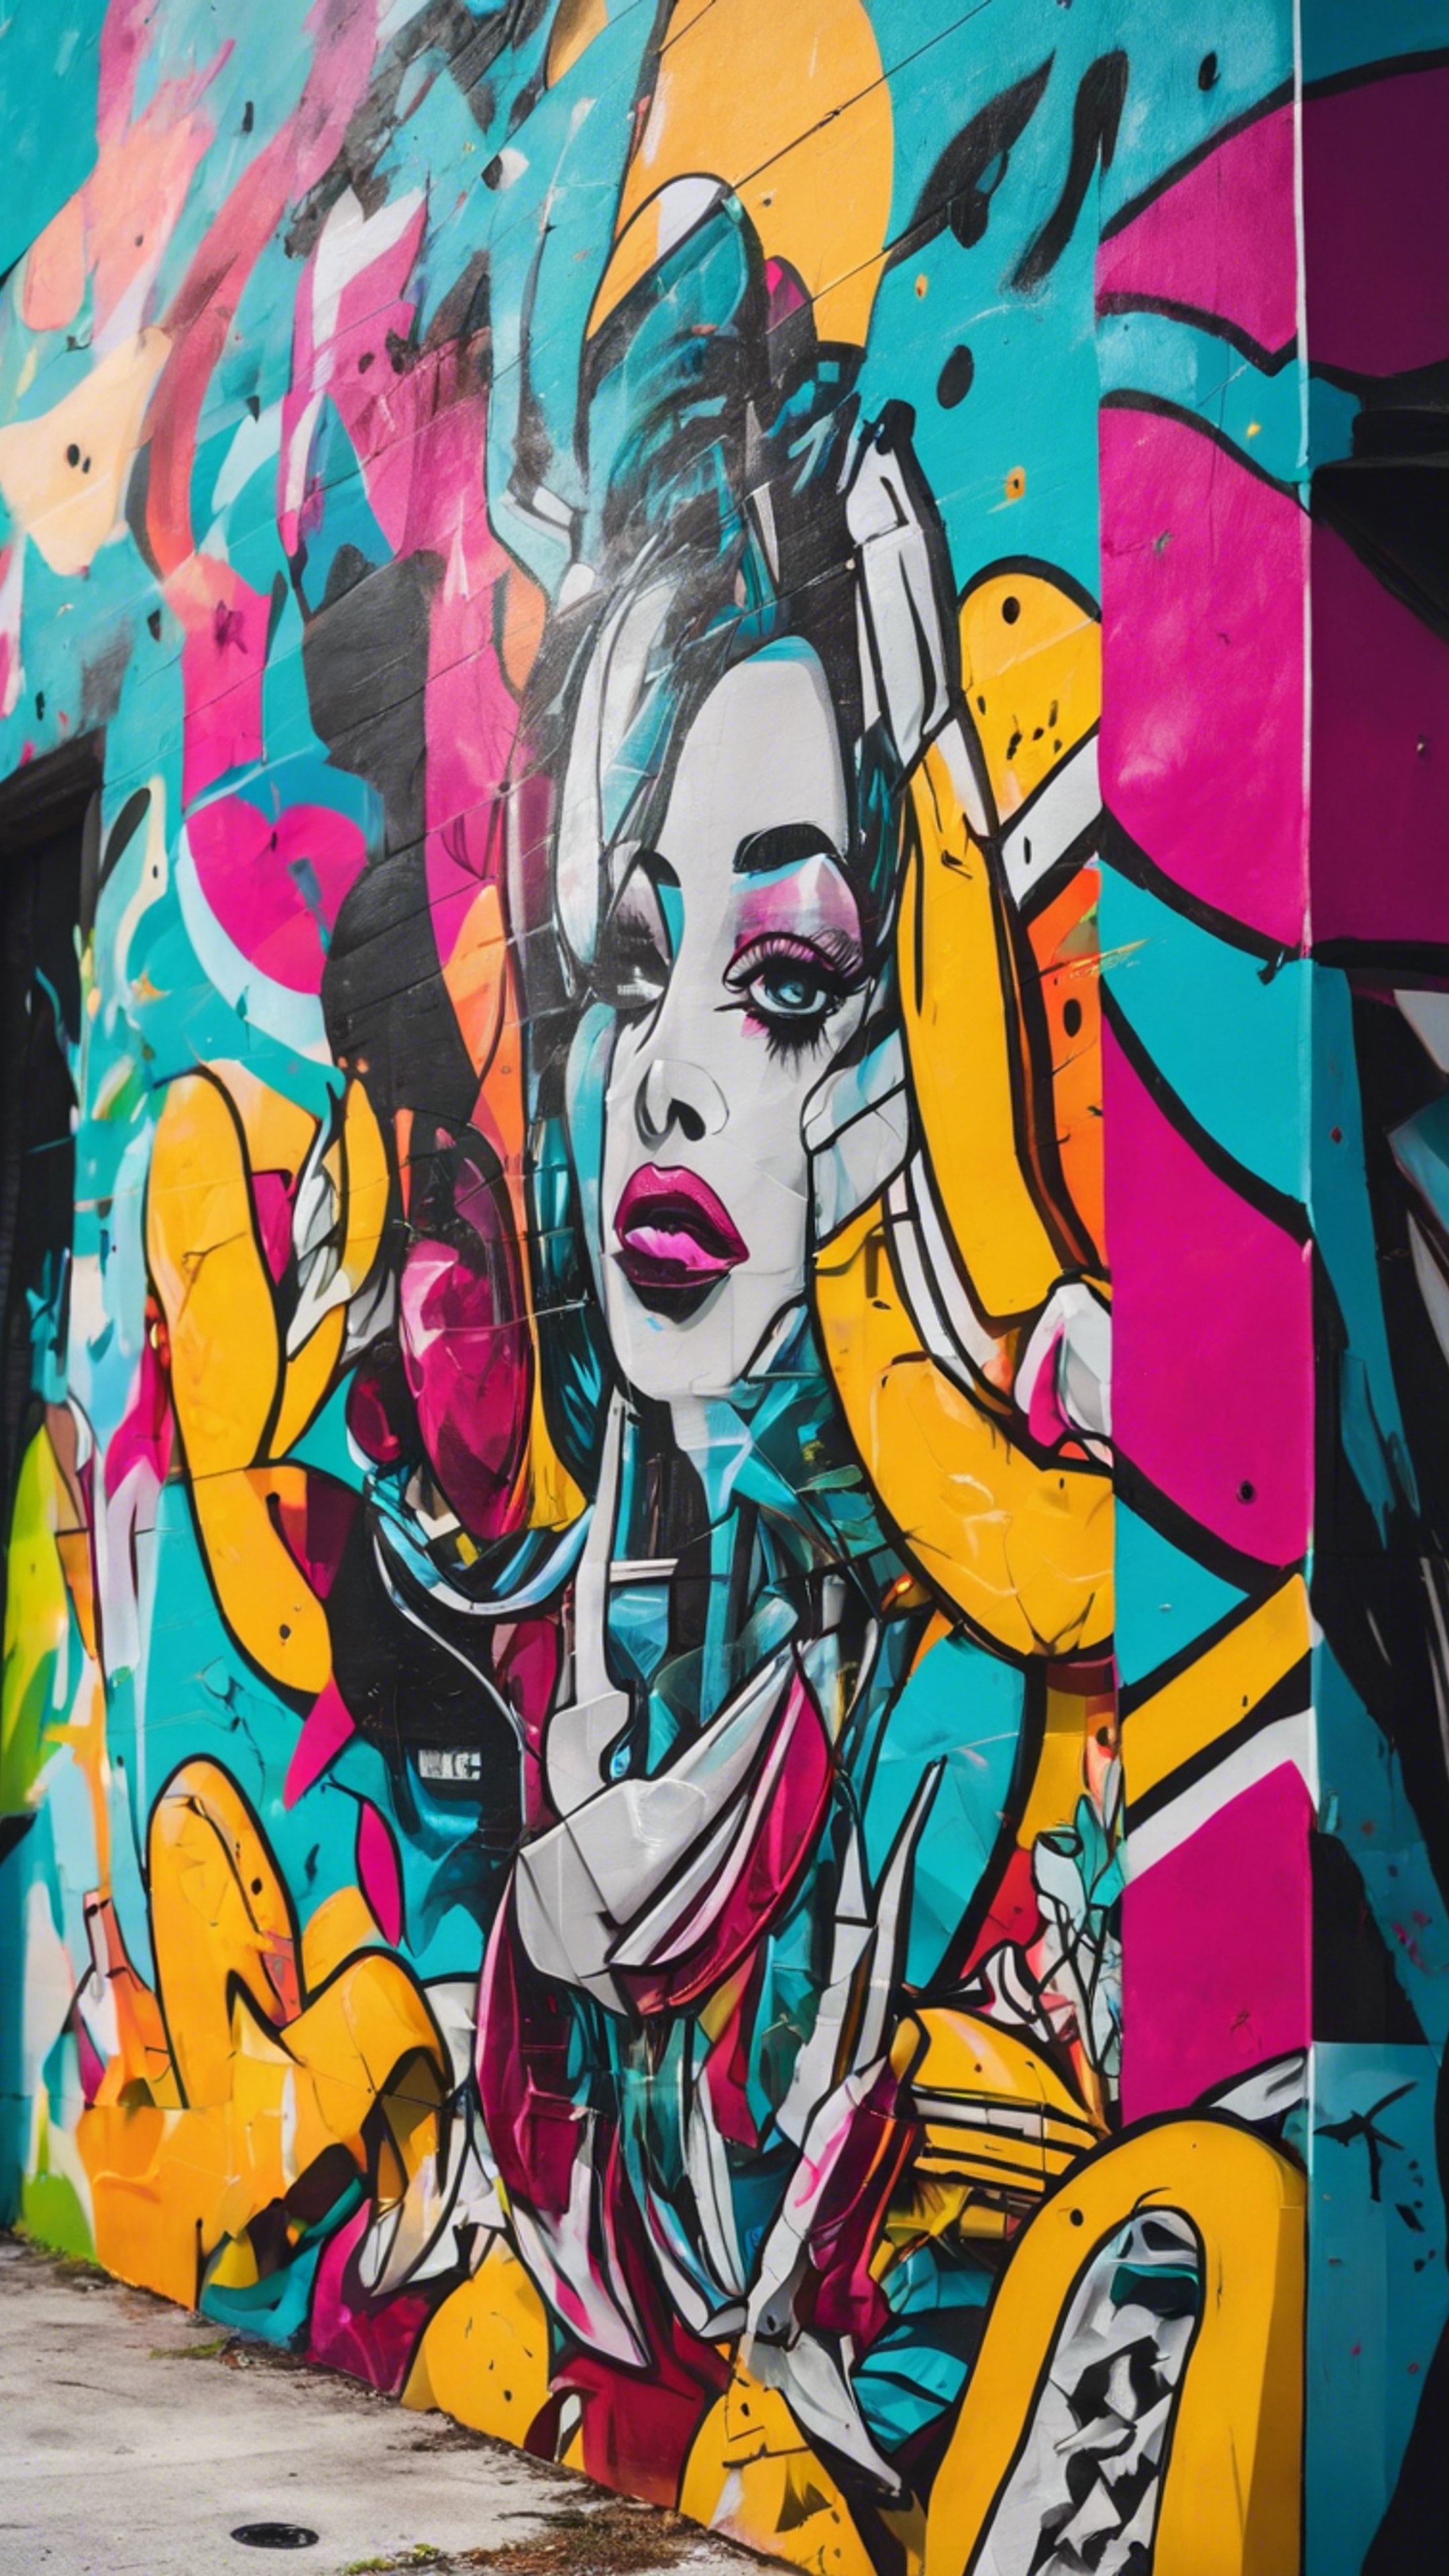 A vibrant street art mural in Wynwood, Miami, featuring abstract art and bright colors. 벽지[fc74442468964623923a]